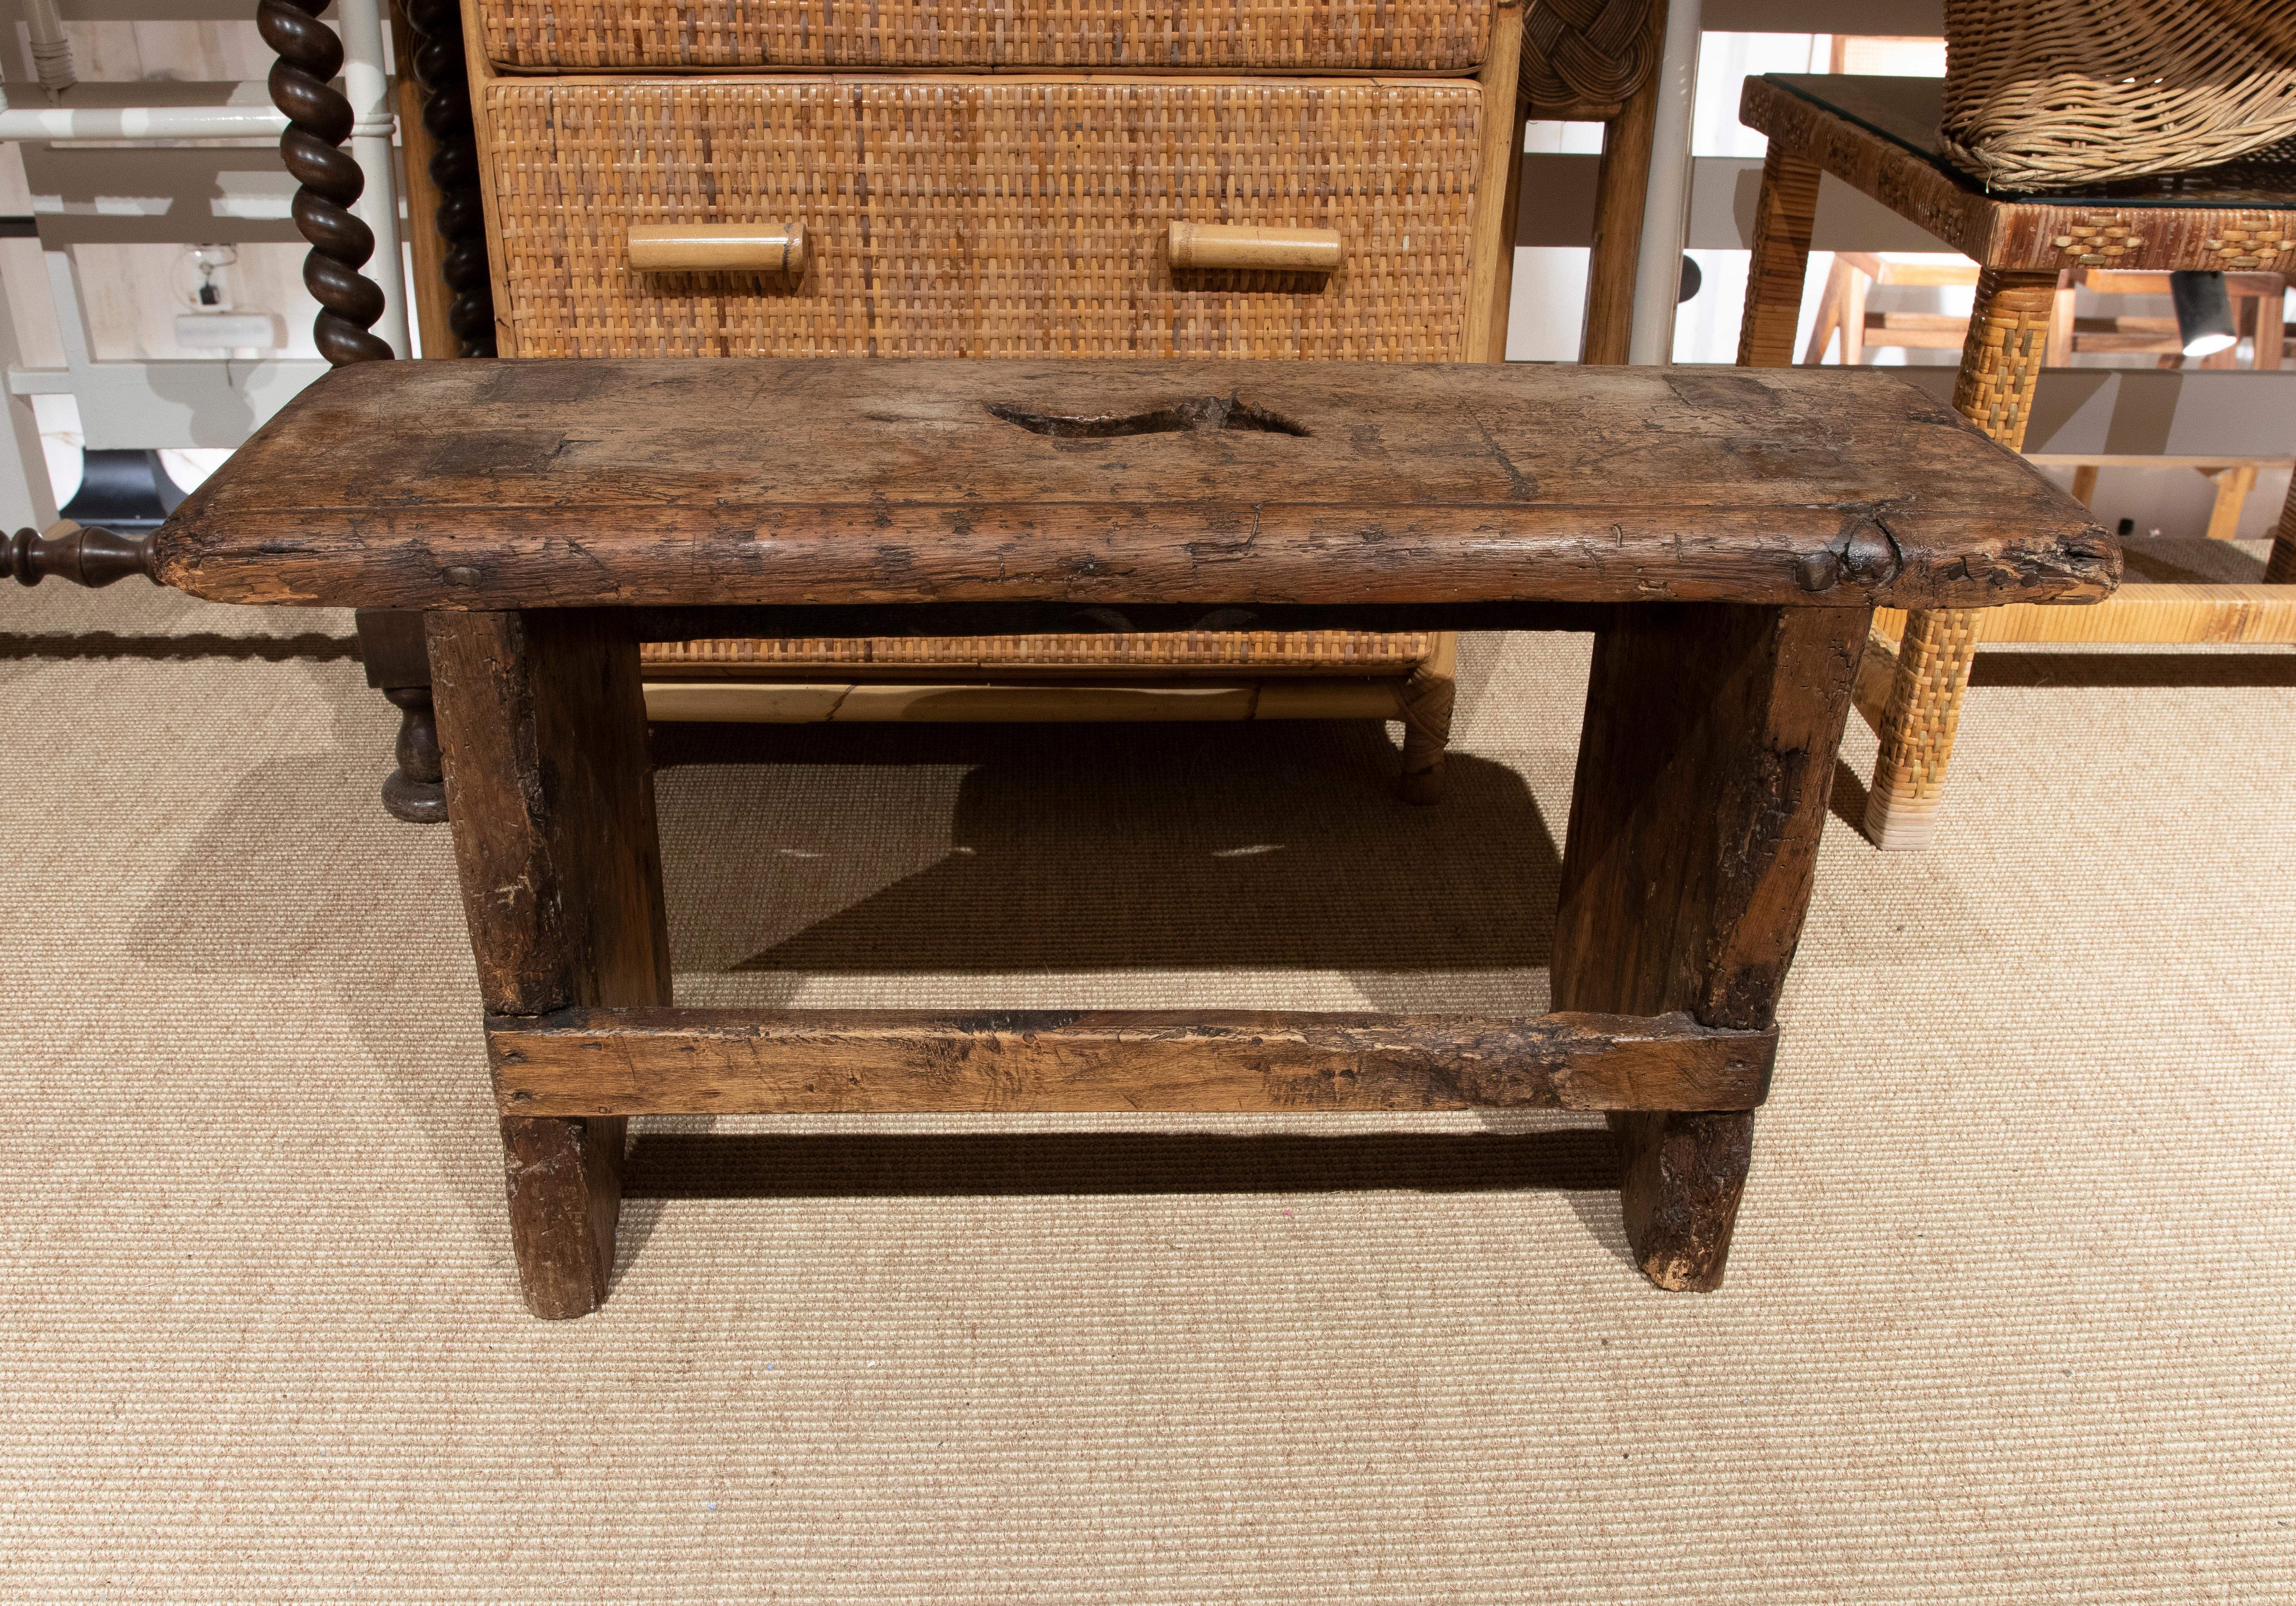 Spanish 18th Century Wooden Bench with Seat Decorated